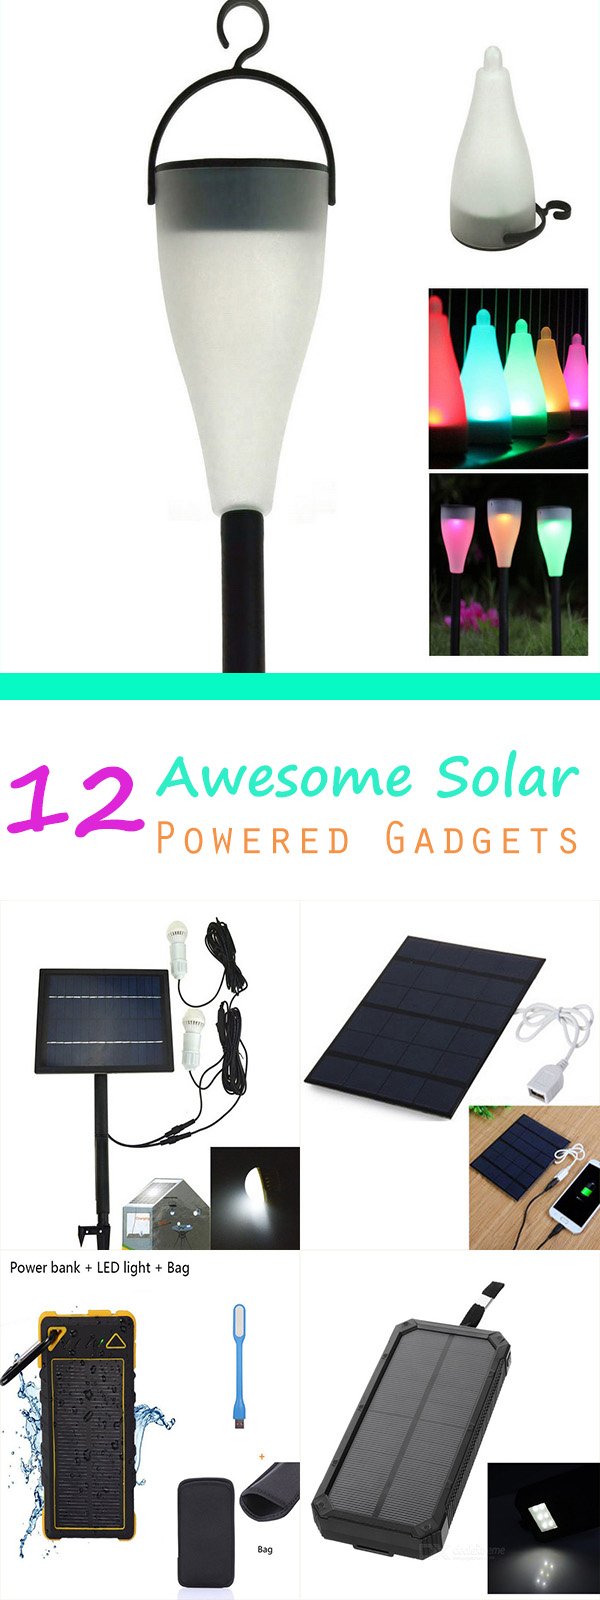 12 Awesome Solar Powered Gadgets